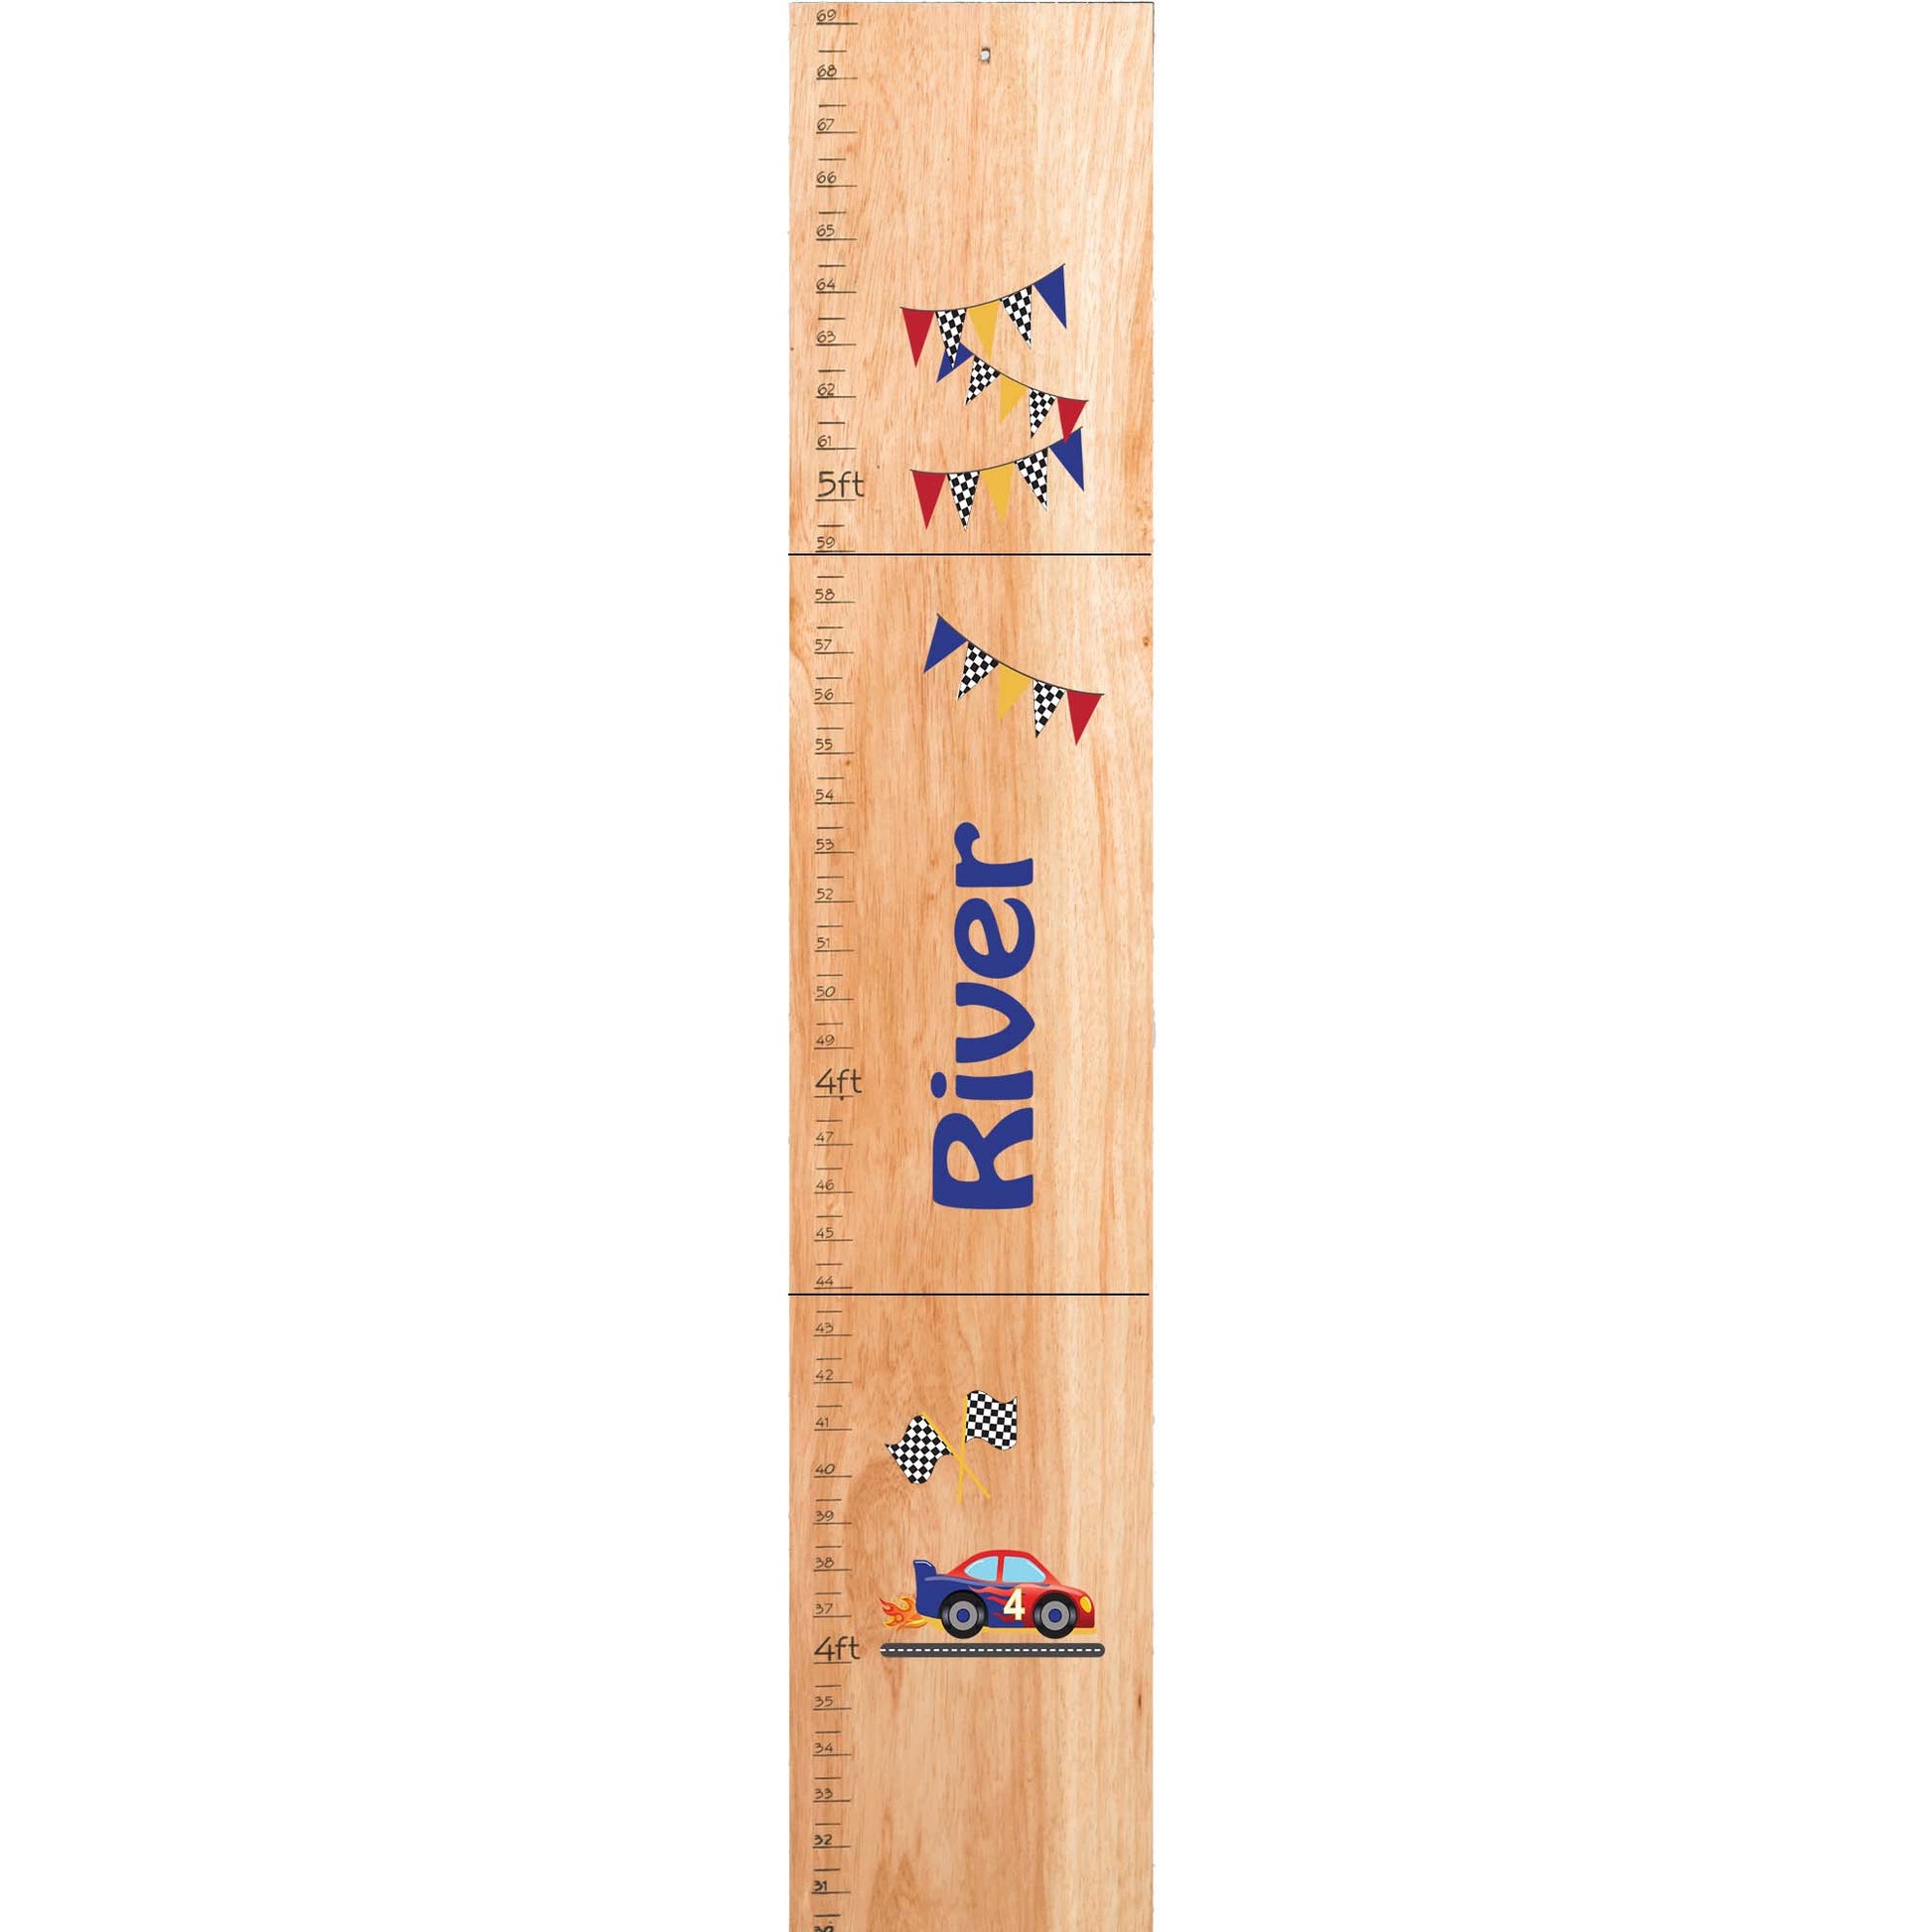 Personalized Natural Growth Chart With Superheros Design